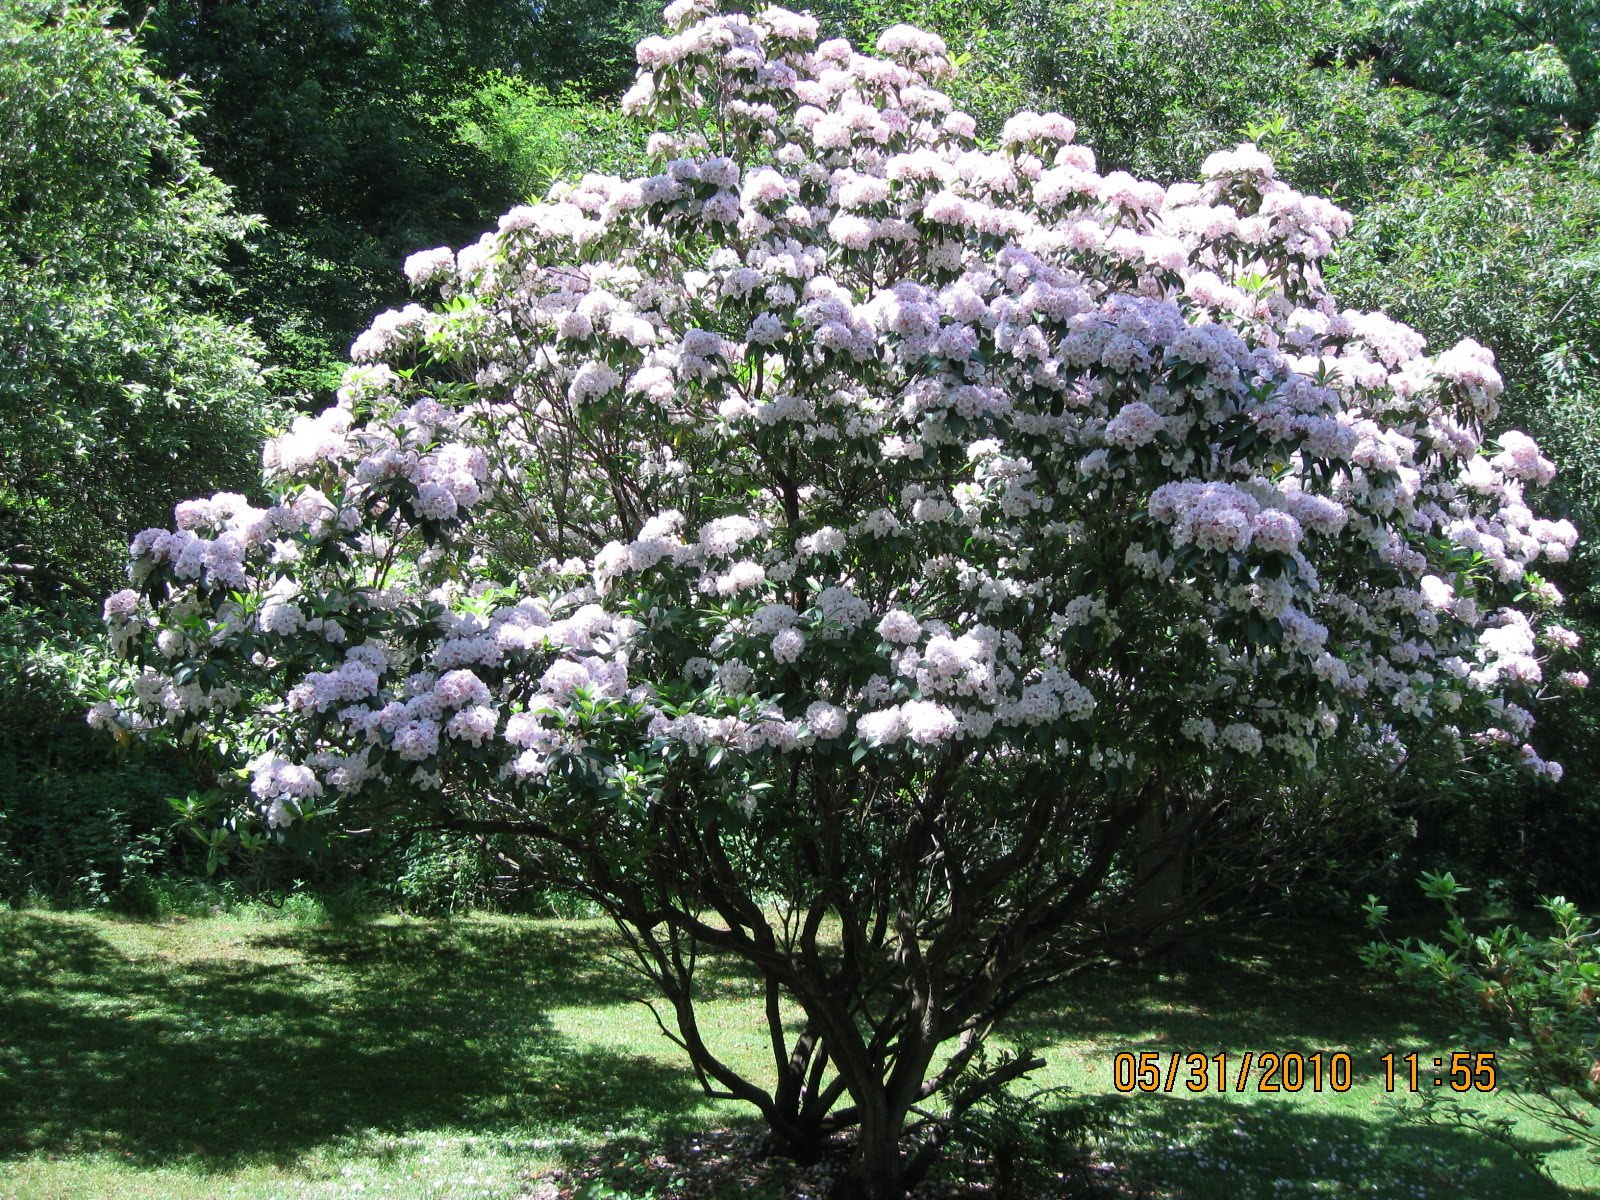 The News From Owl Hollow: An Abundance of Mountain Laurel & the Value